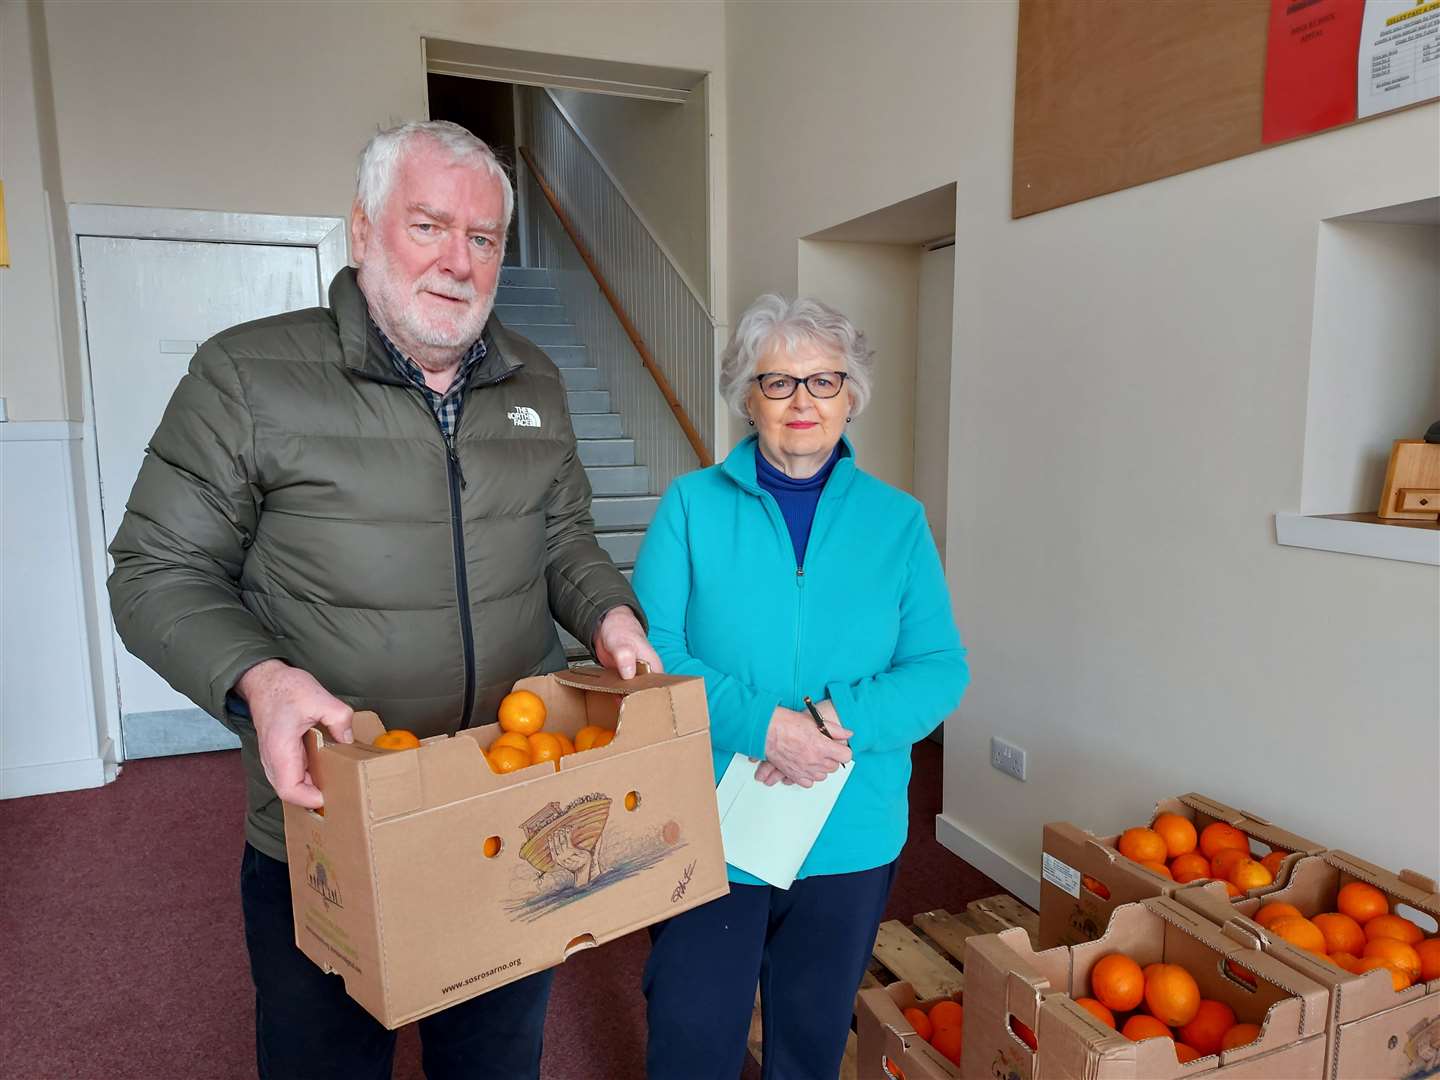 Brenda Gifford of The Three Kings Cullen Association and Alastair Rossetter of St Andrew’s Lhanbryd and Urquhart Church with a deivery of oranges.